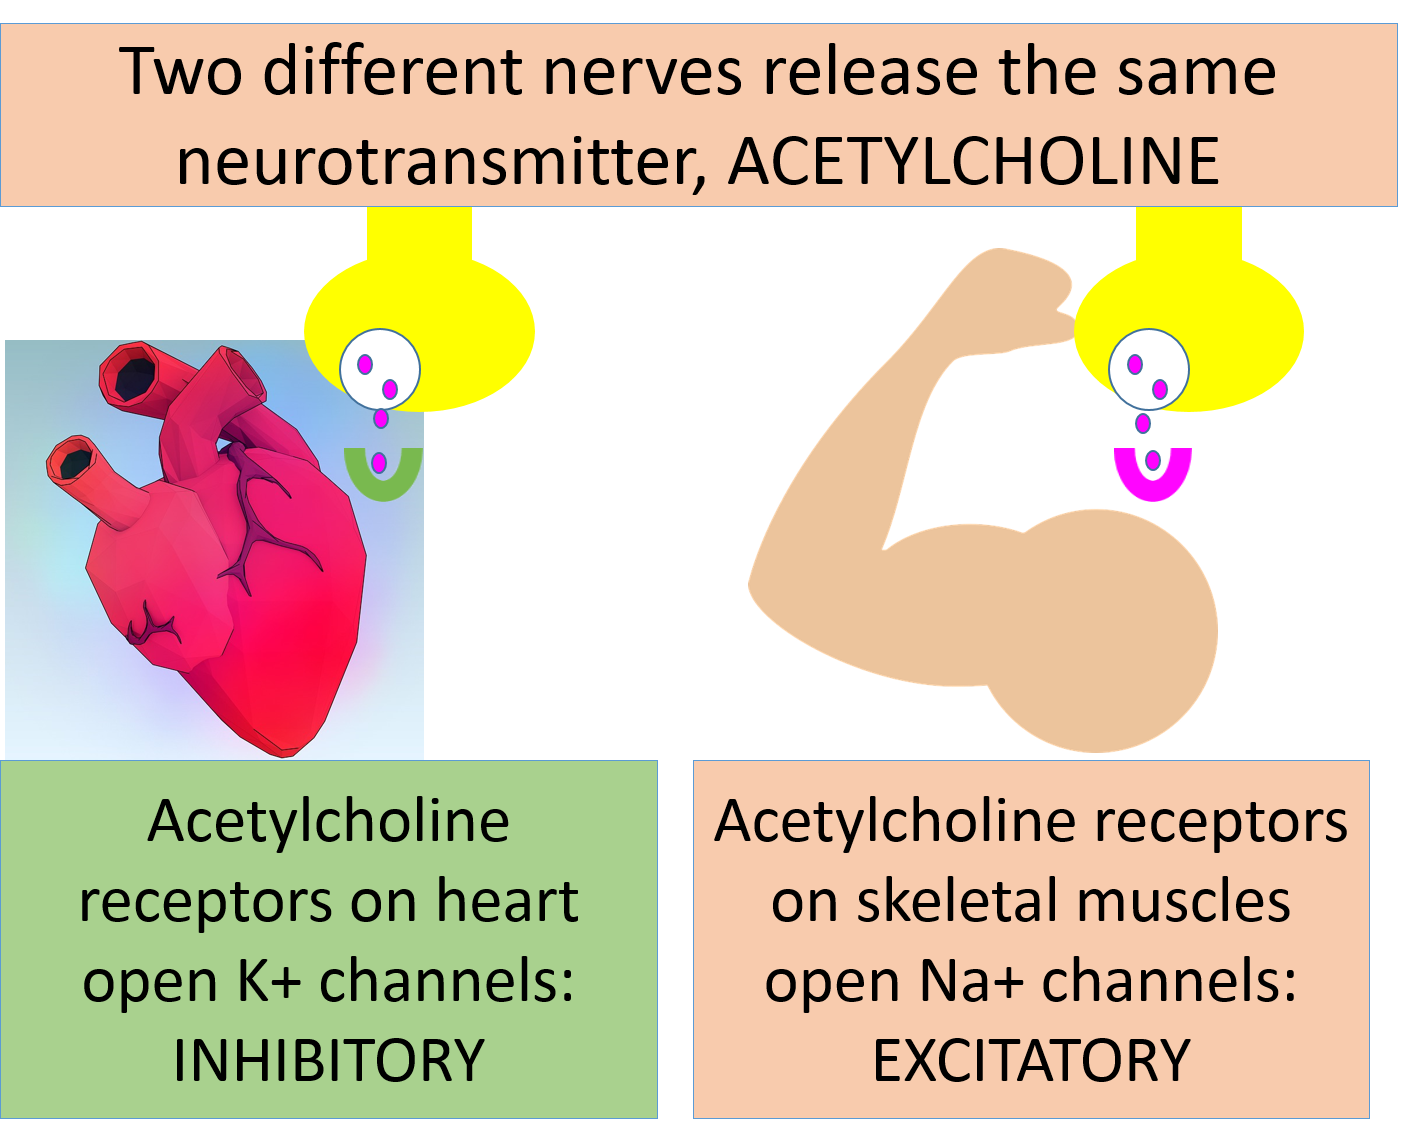 image of two synaptic boutons, both releasing acetylcholine. One is releasing it to the heart, which has green-colored receptors. The other is releasing it to a skeletal muscle, which has pink-colored receptors.